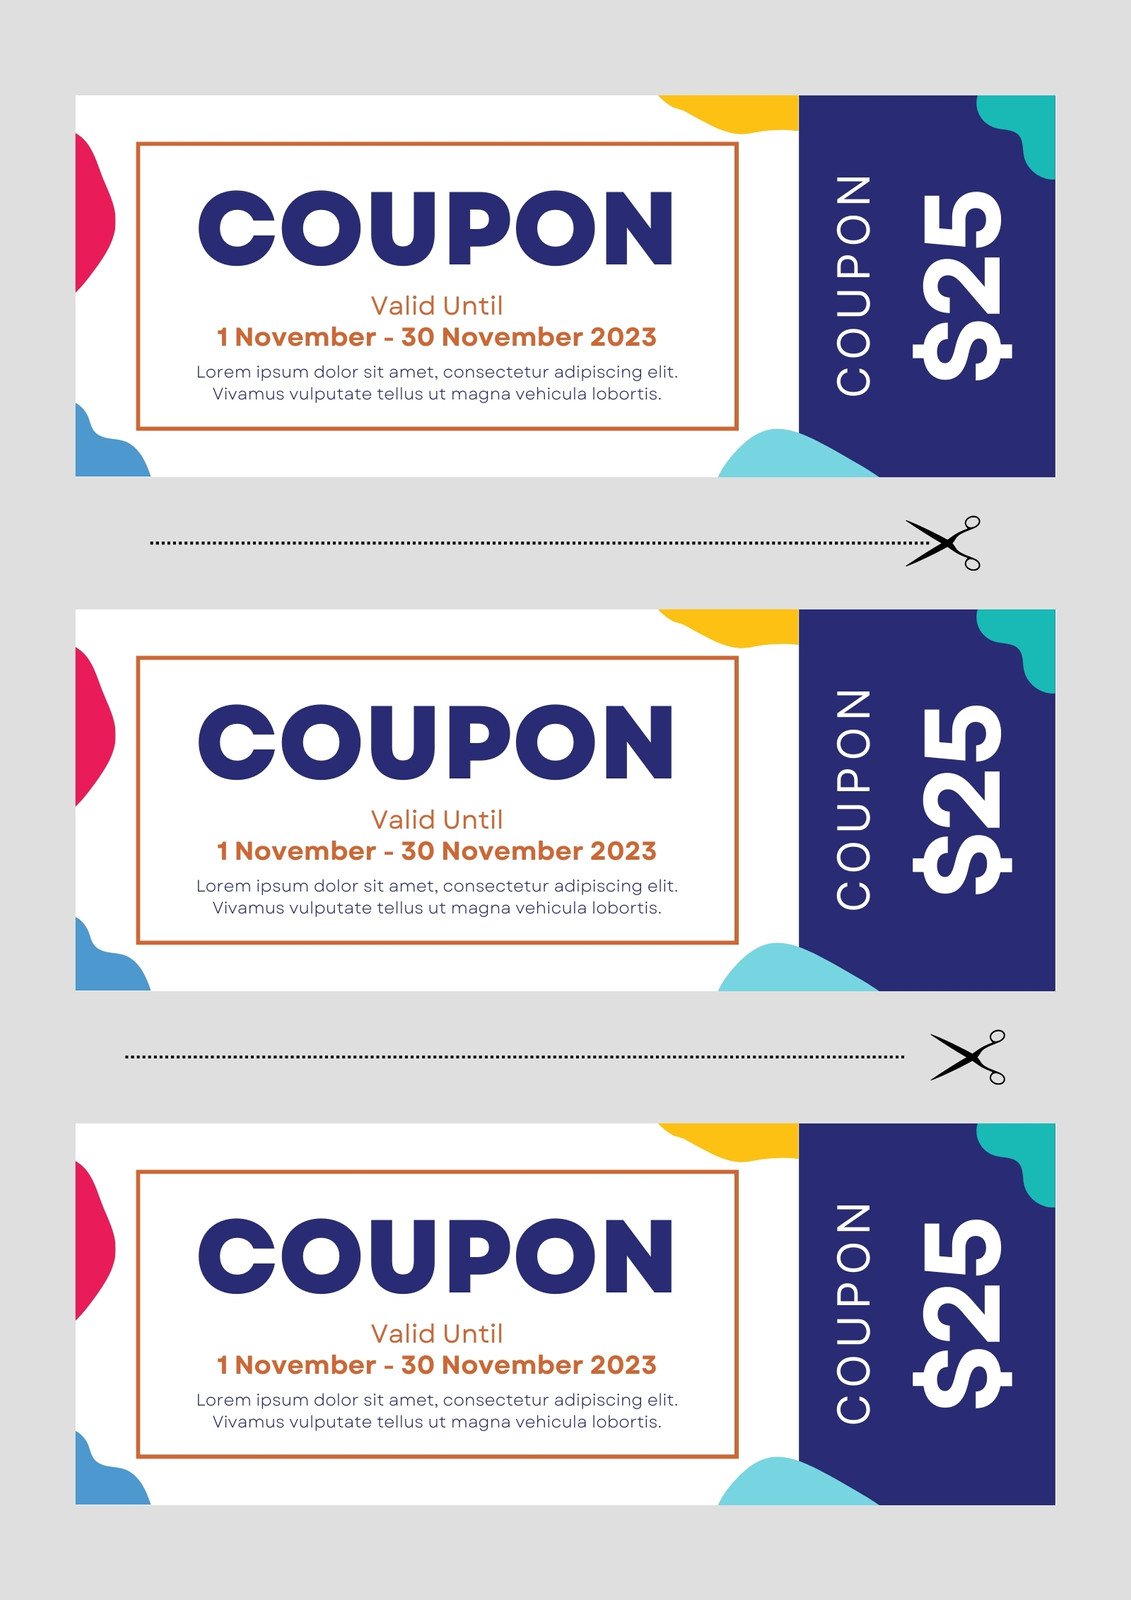 Small Business Coupon Marketing: Tips for Success